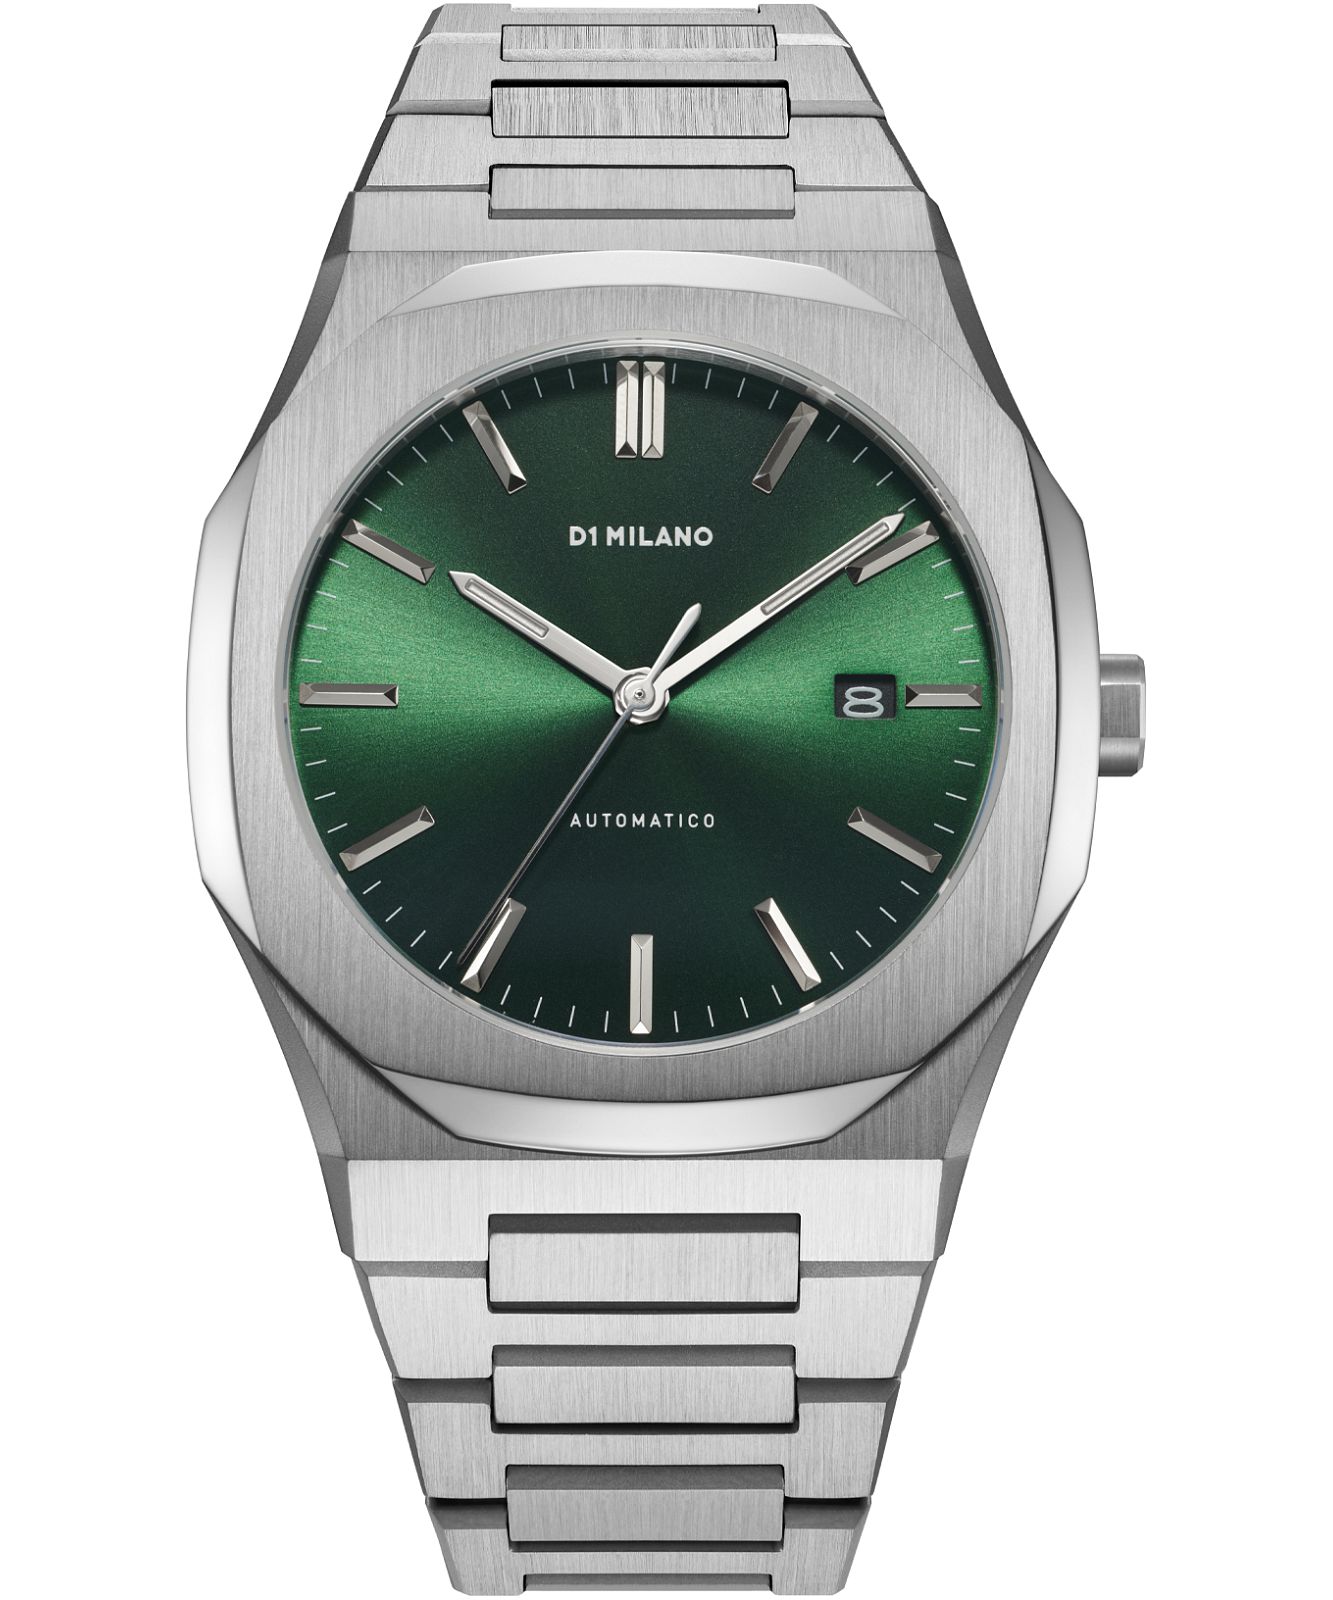 D1 Milano ATBJ12 - Automatic Green Watch •